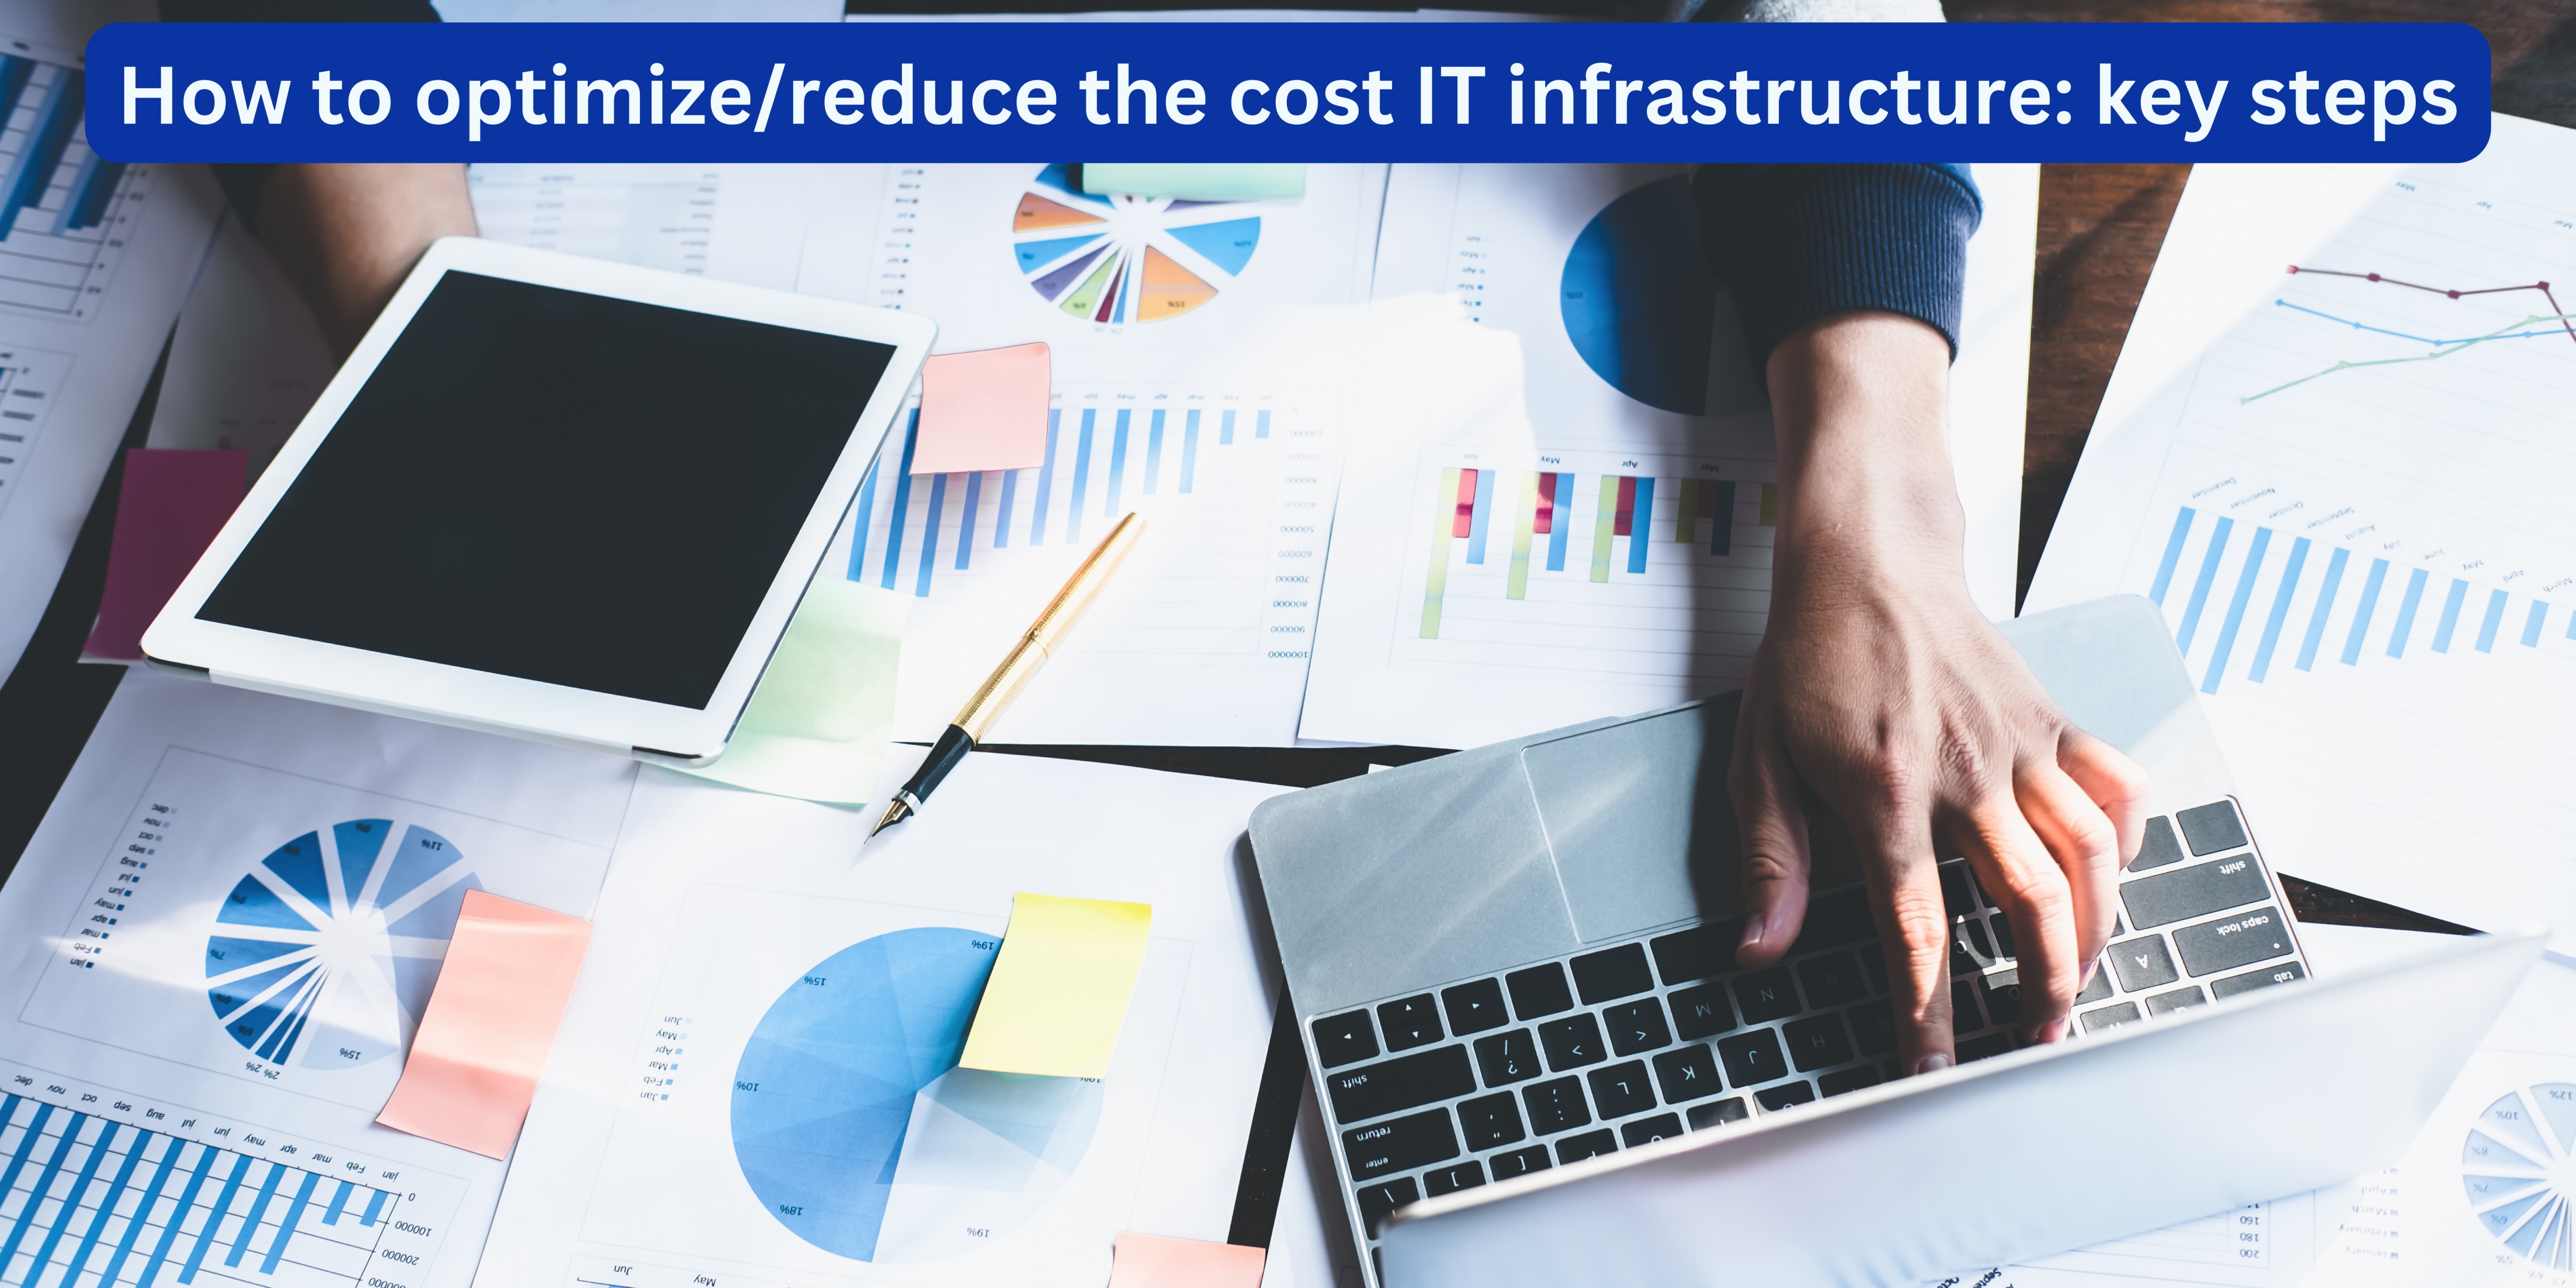 How to optimize/reduce the cost IT infrastructure: key steps